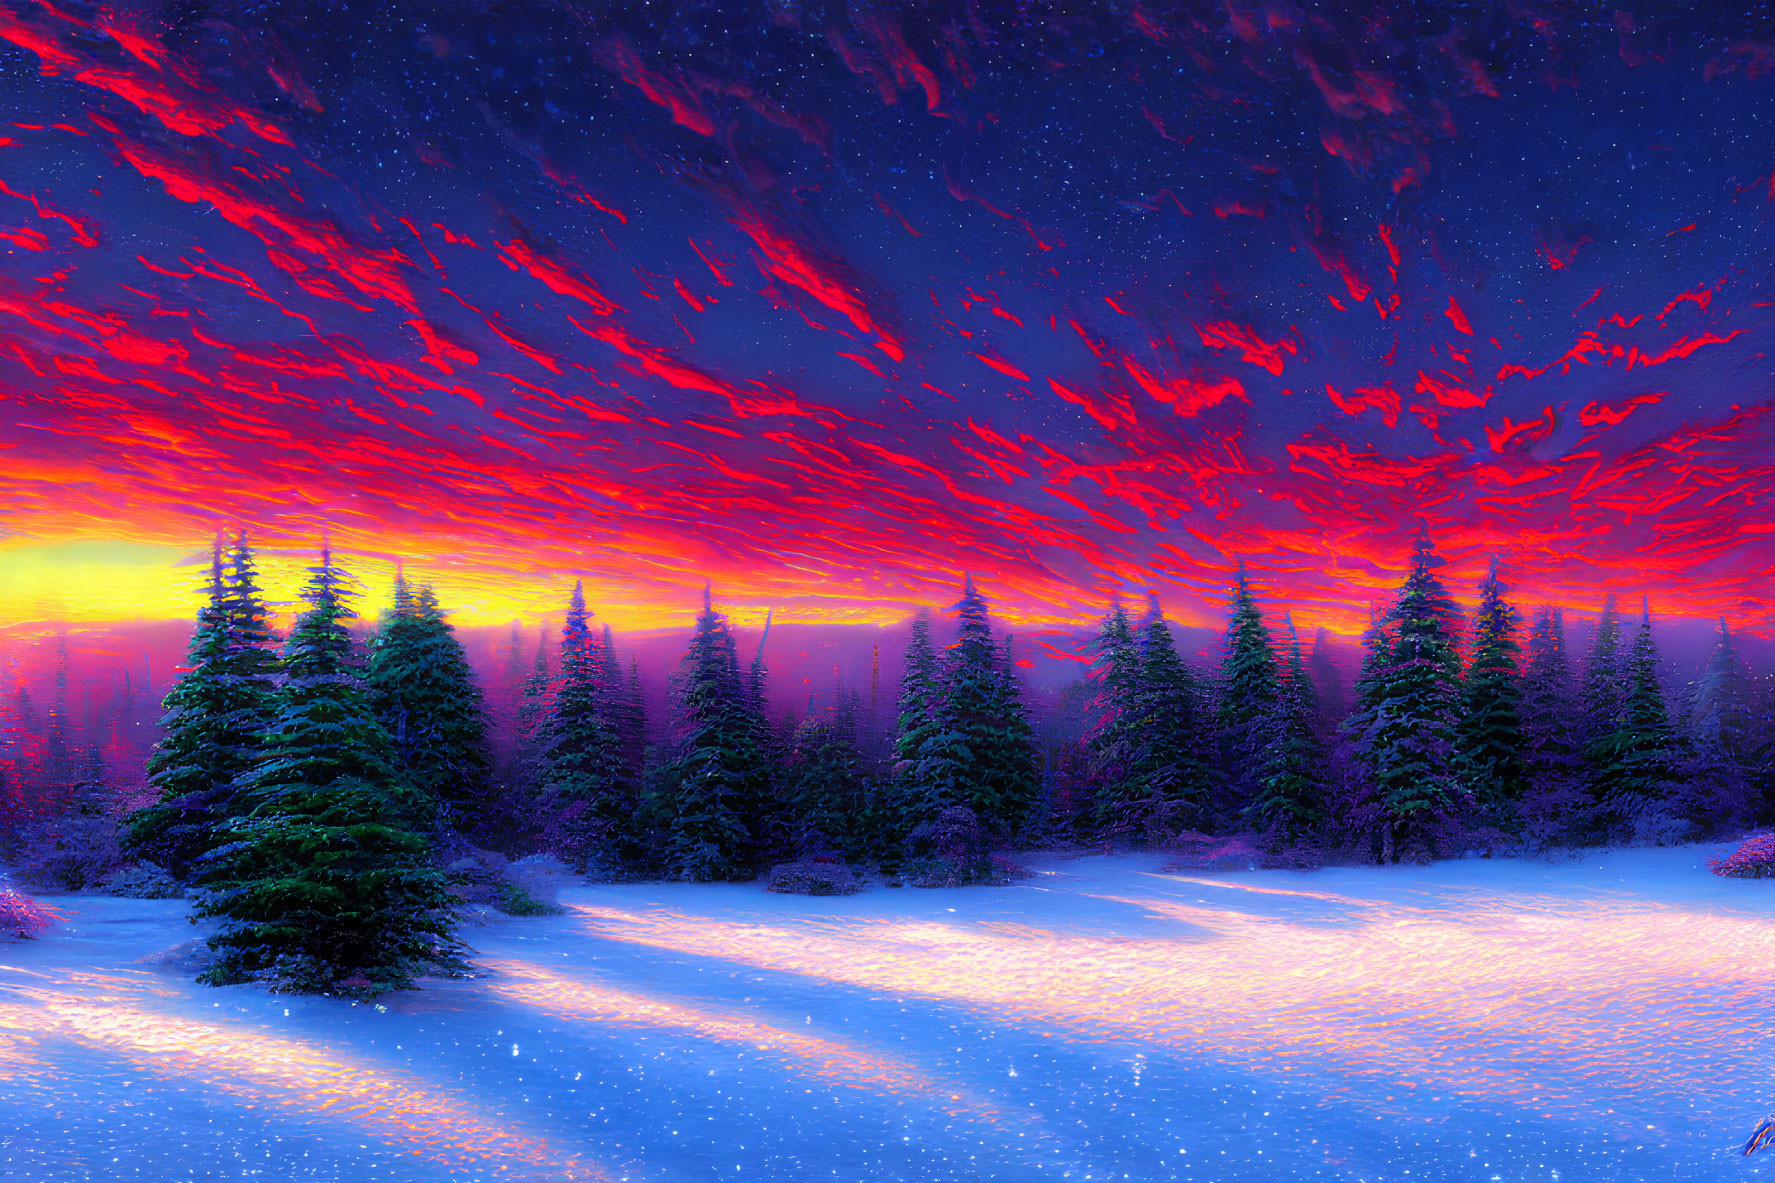 Fiery sky over snow-covered winter landscape